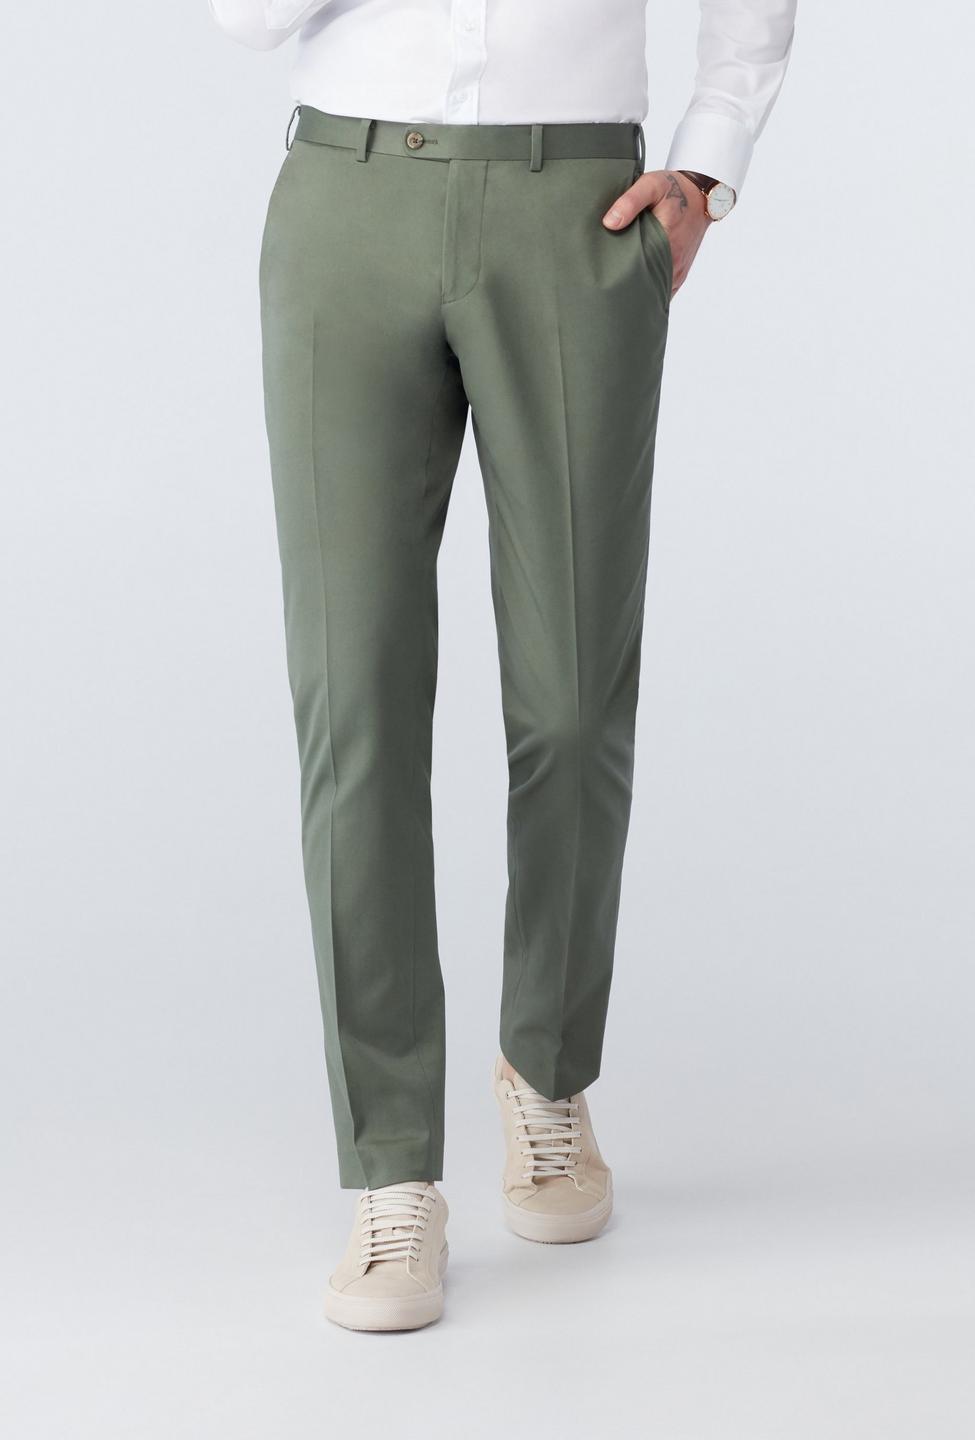 Details more than 131 olive trousers super hot